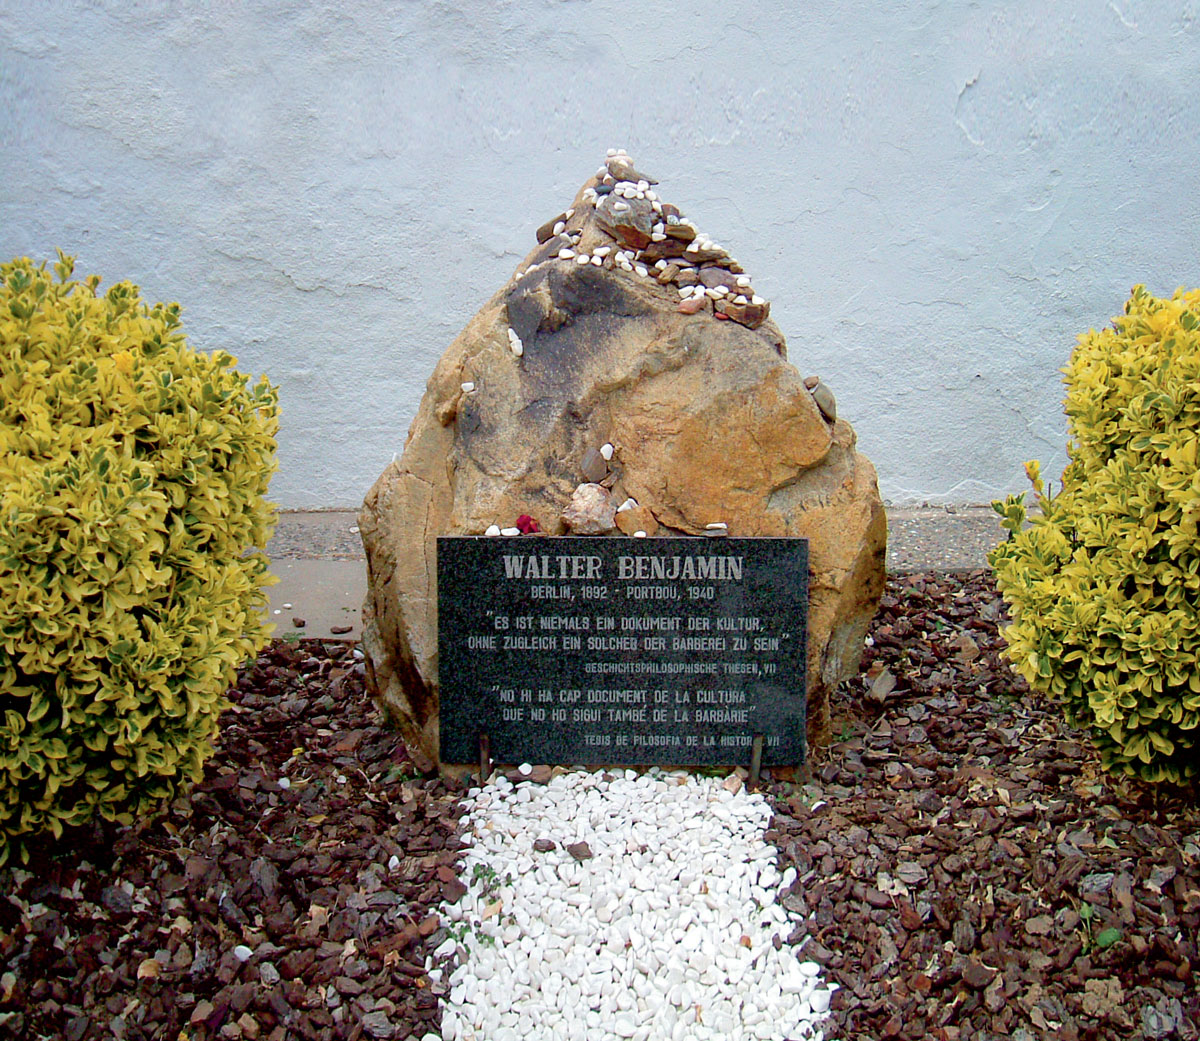 A photograph of Walter Benjamin’s grave in Portbou, Catalonia, where he committed suicide in September nineteen forty. The epitaph, in German and in Catalan, is from Benjamin’s “Theses on the Philosophy of History”: and reads “There is no document of civilization which is not at the same time a document of barbarism.”